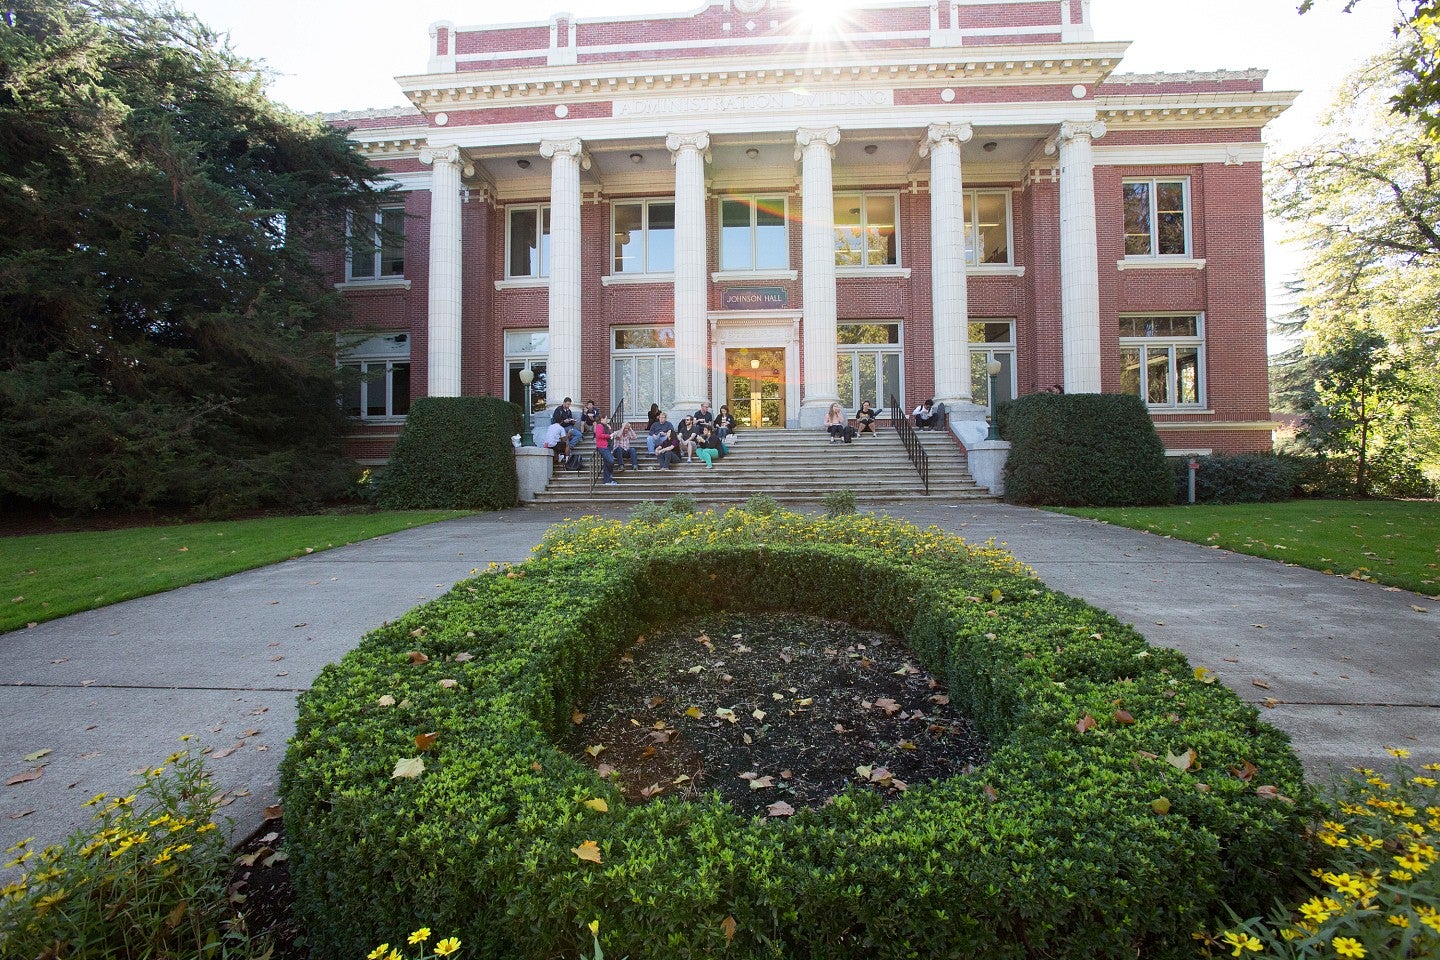 Landscaped Oregon "O" in front of Johnson hall, a red brick building with white front columns.